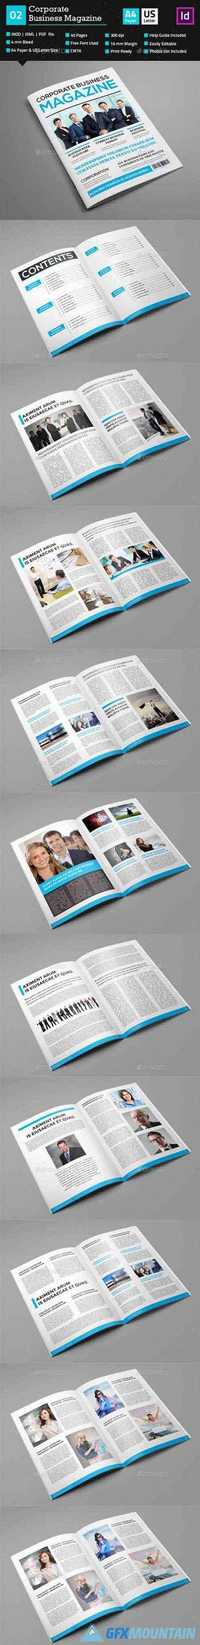 Corporate Business Magazine_Indesign 40 Pages_V2 9789663